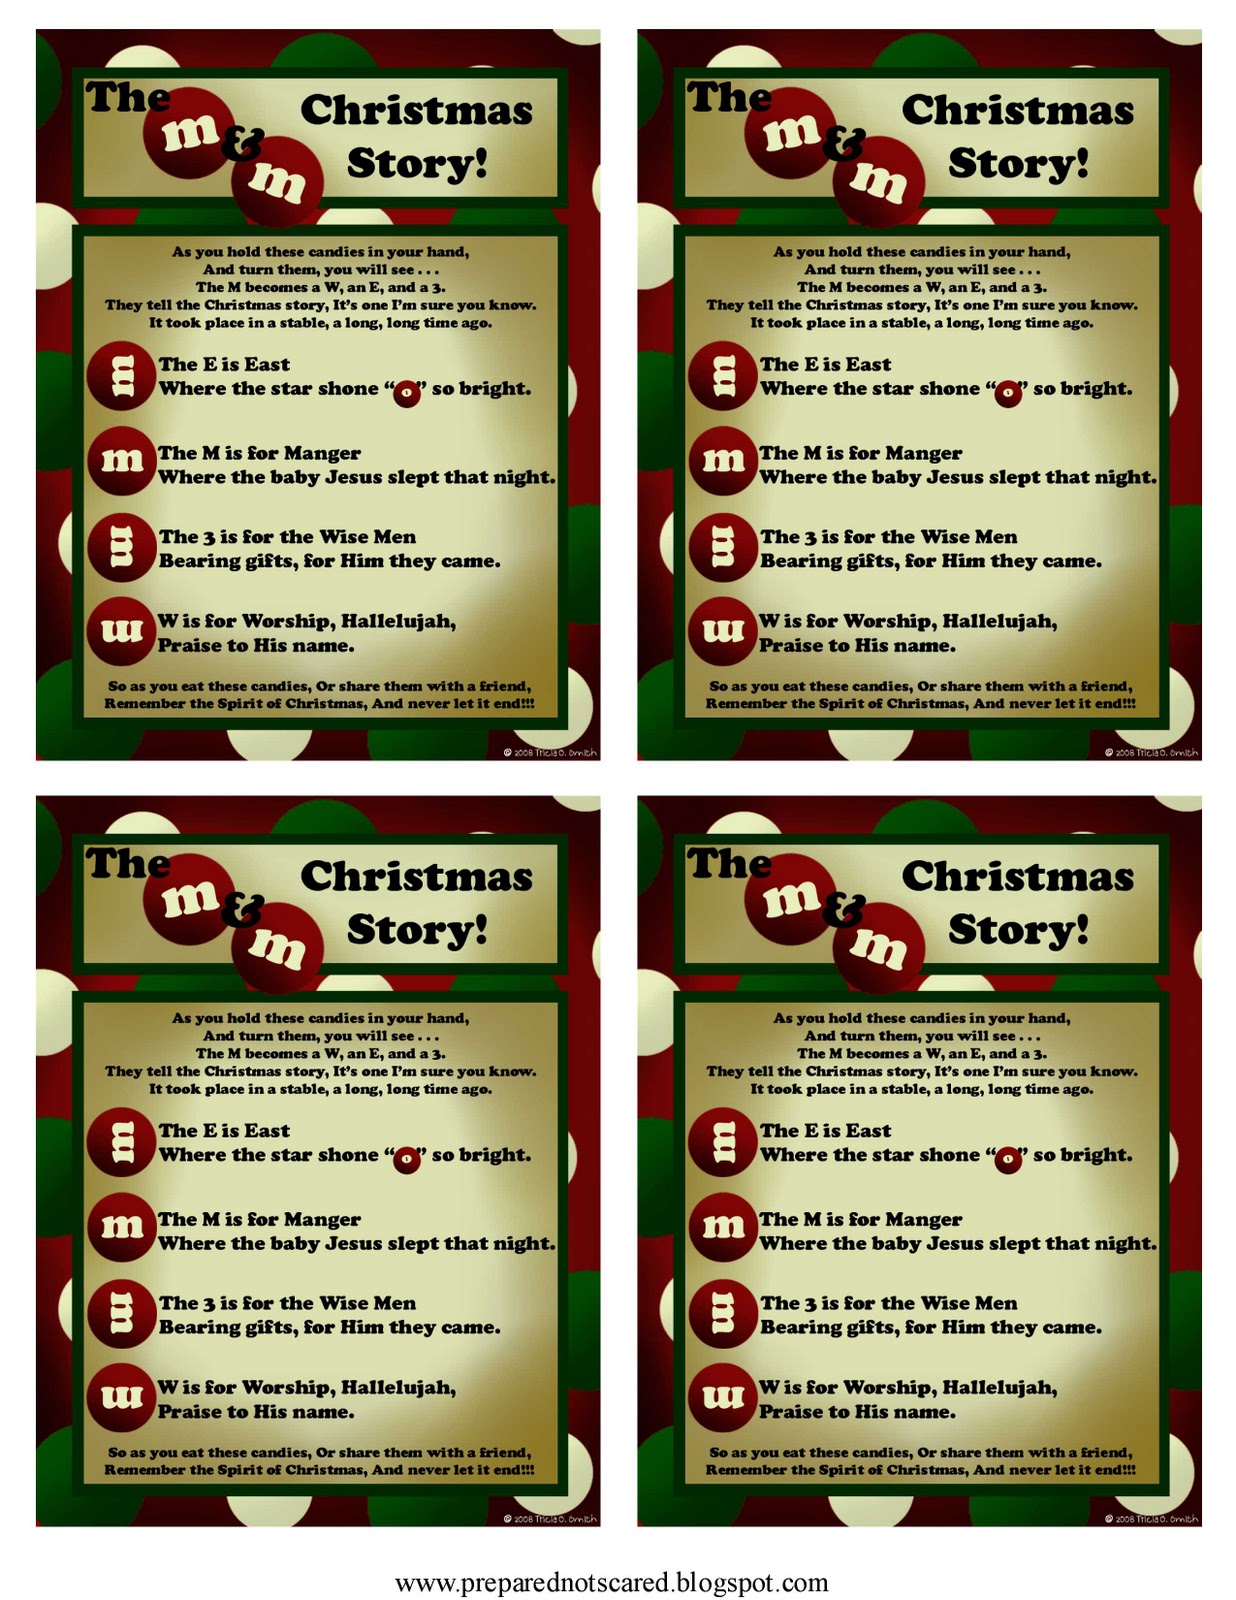 Prepared NOT Scared! The M&M Christmas Story!